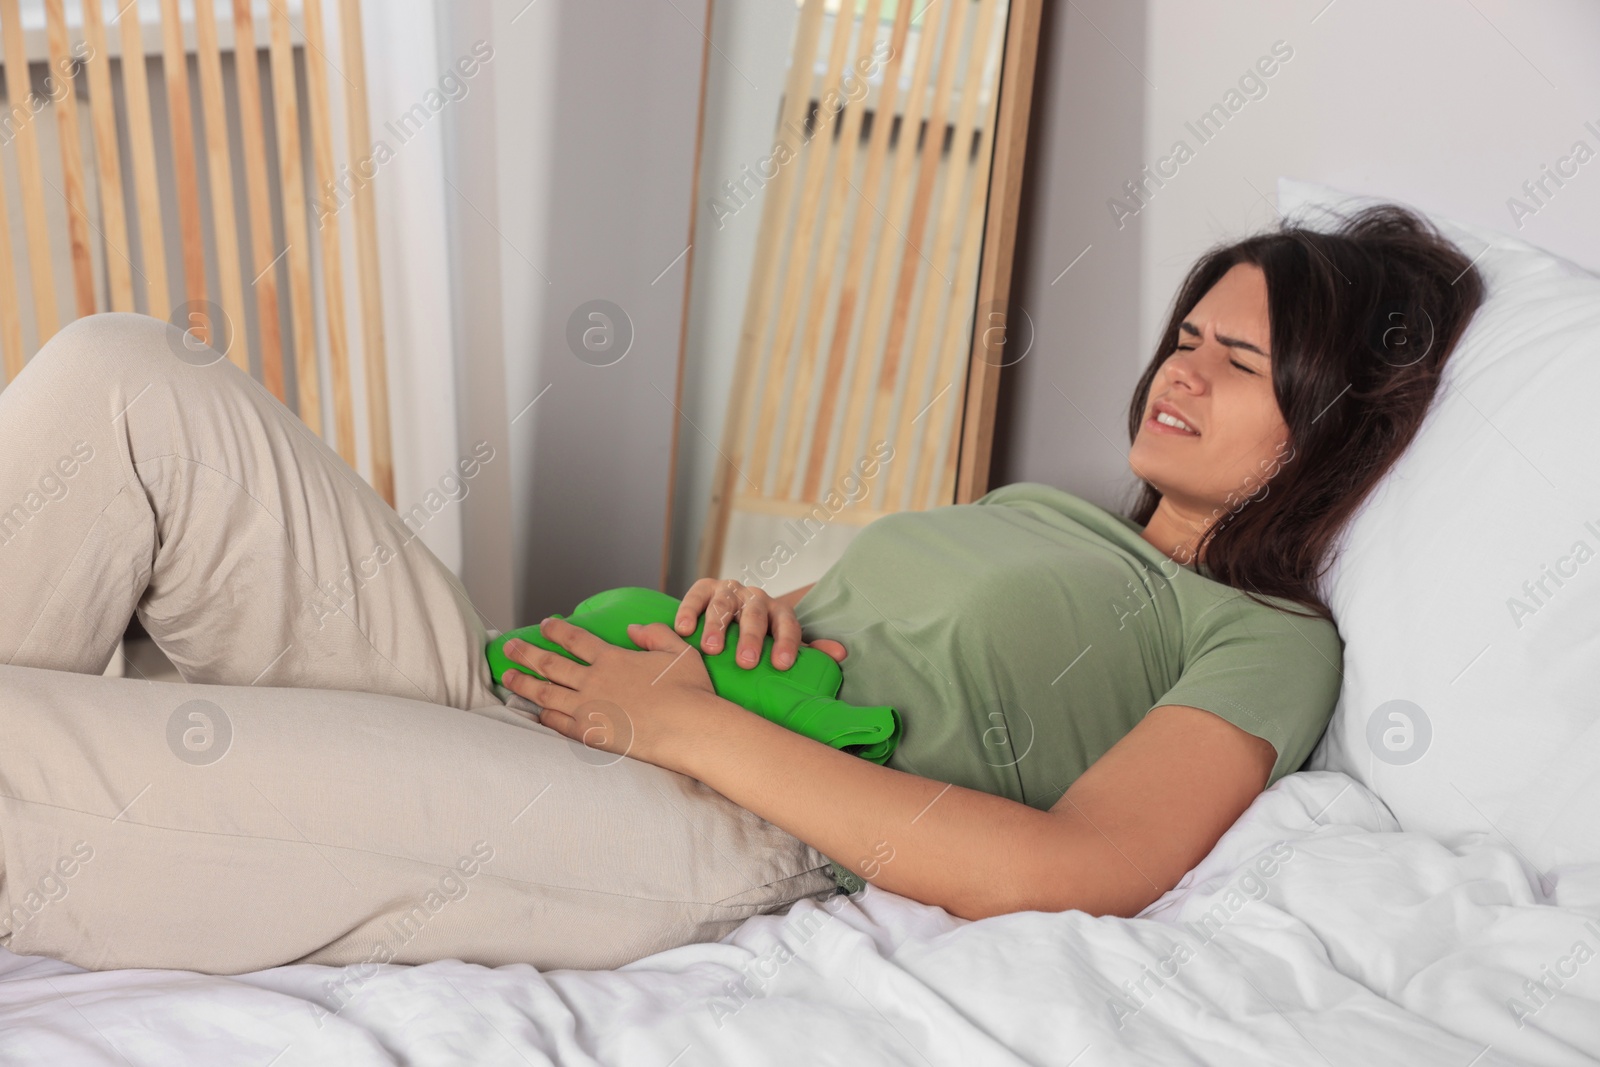 Photo of Young woman using hot water bottle to relieve cystitis pain on bed at home